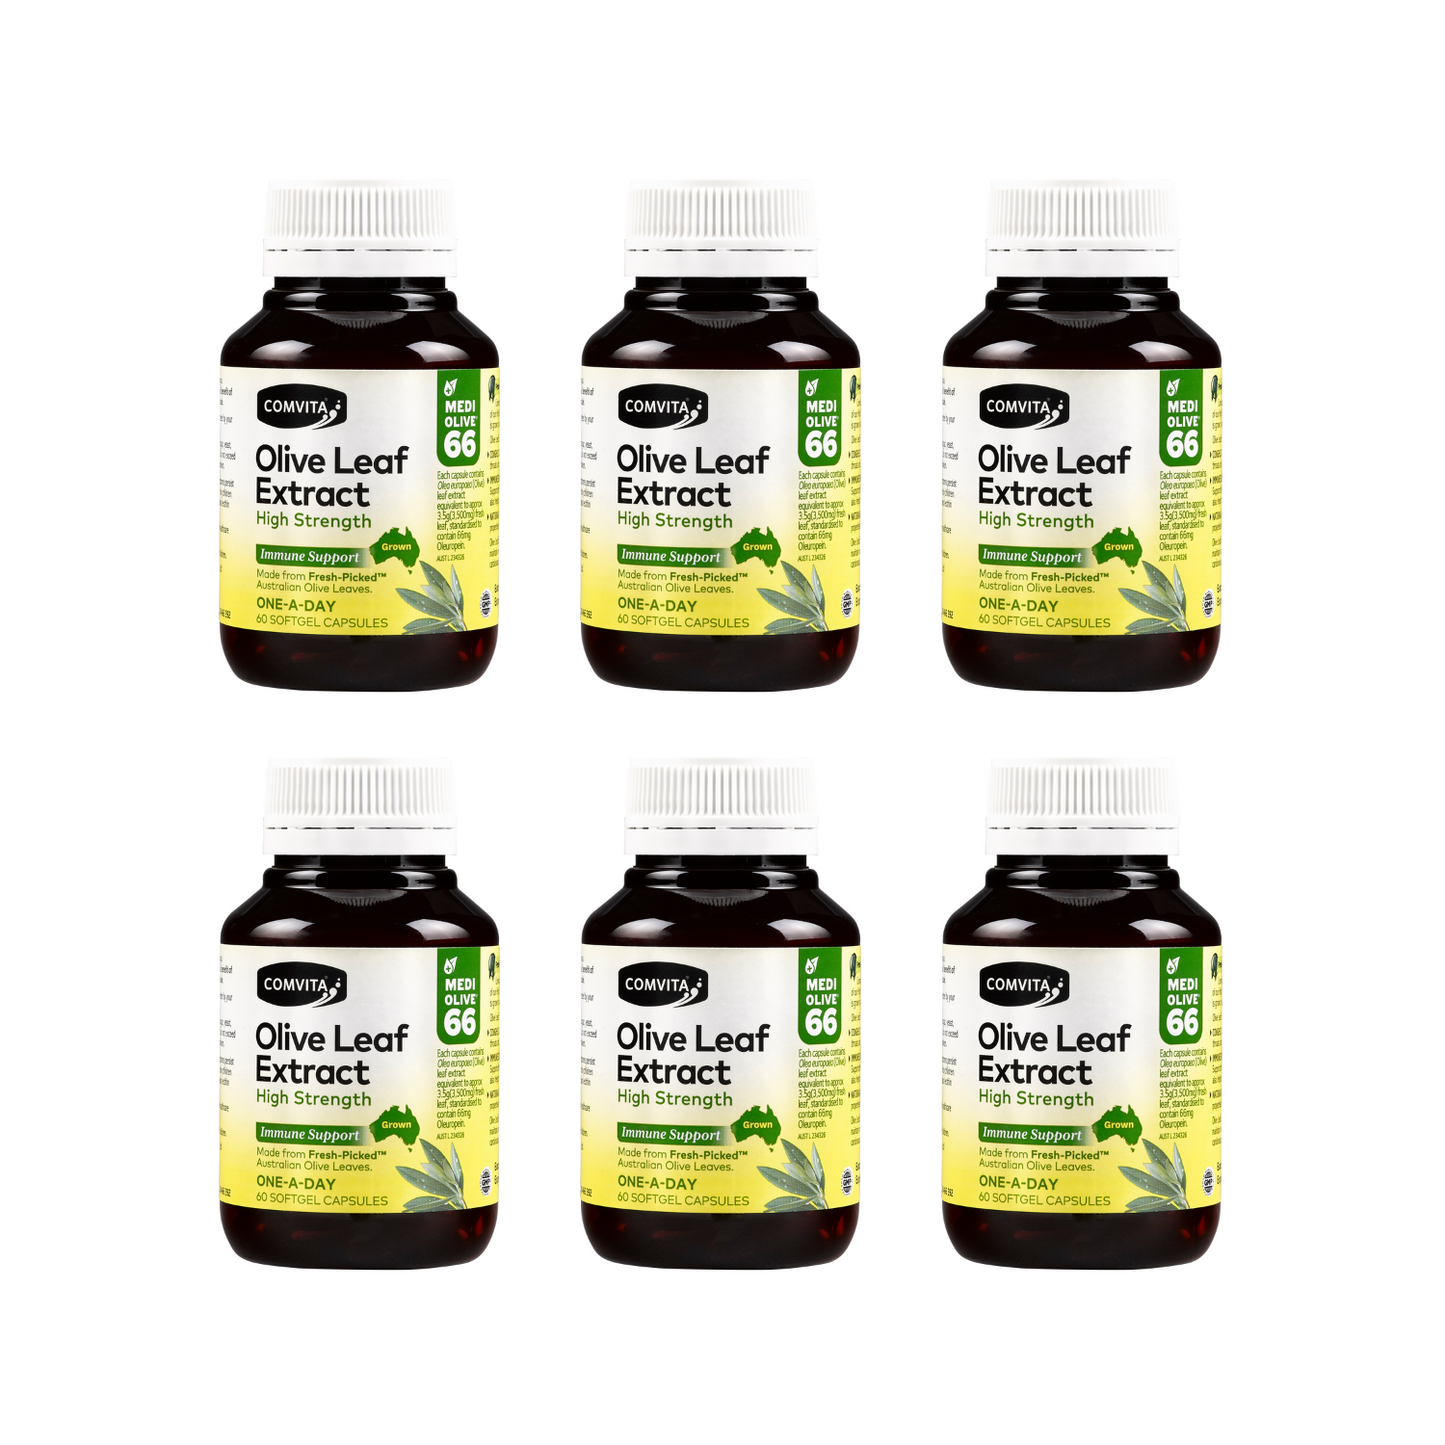 30% Off [Bundle of 6] Comvita Olive Leaf Extract Capsules (High Strength), 60 caps.